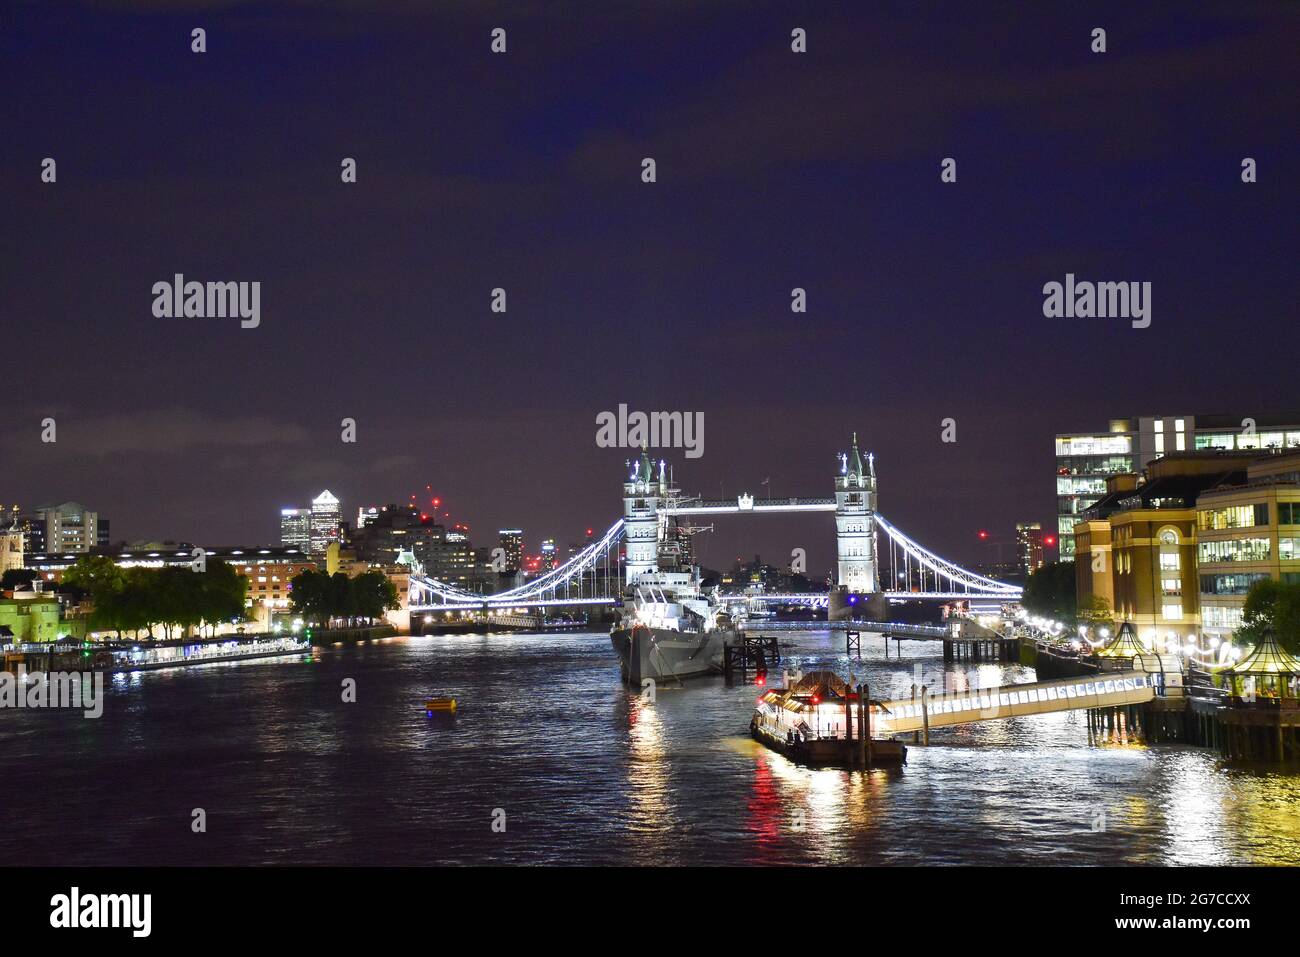 View of the River Thames at night with the illuminated London Bridge and HMS Belfast. Stock Photo